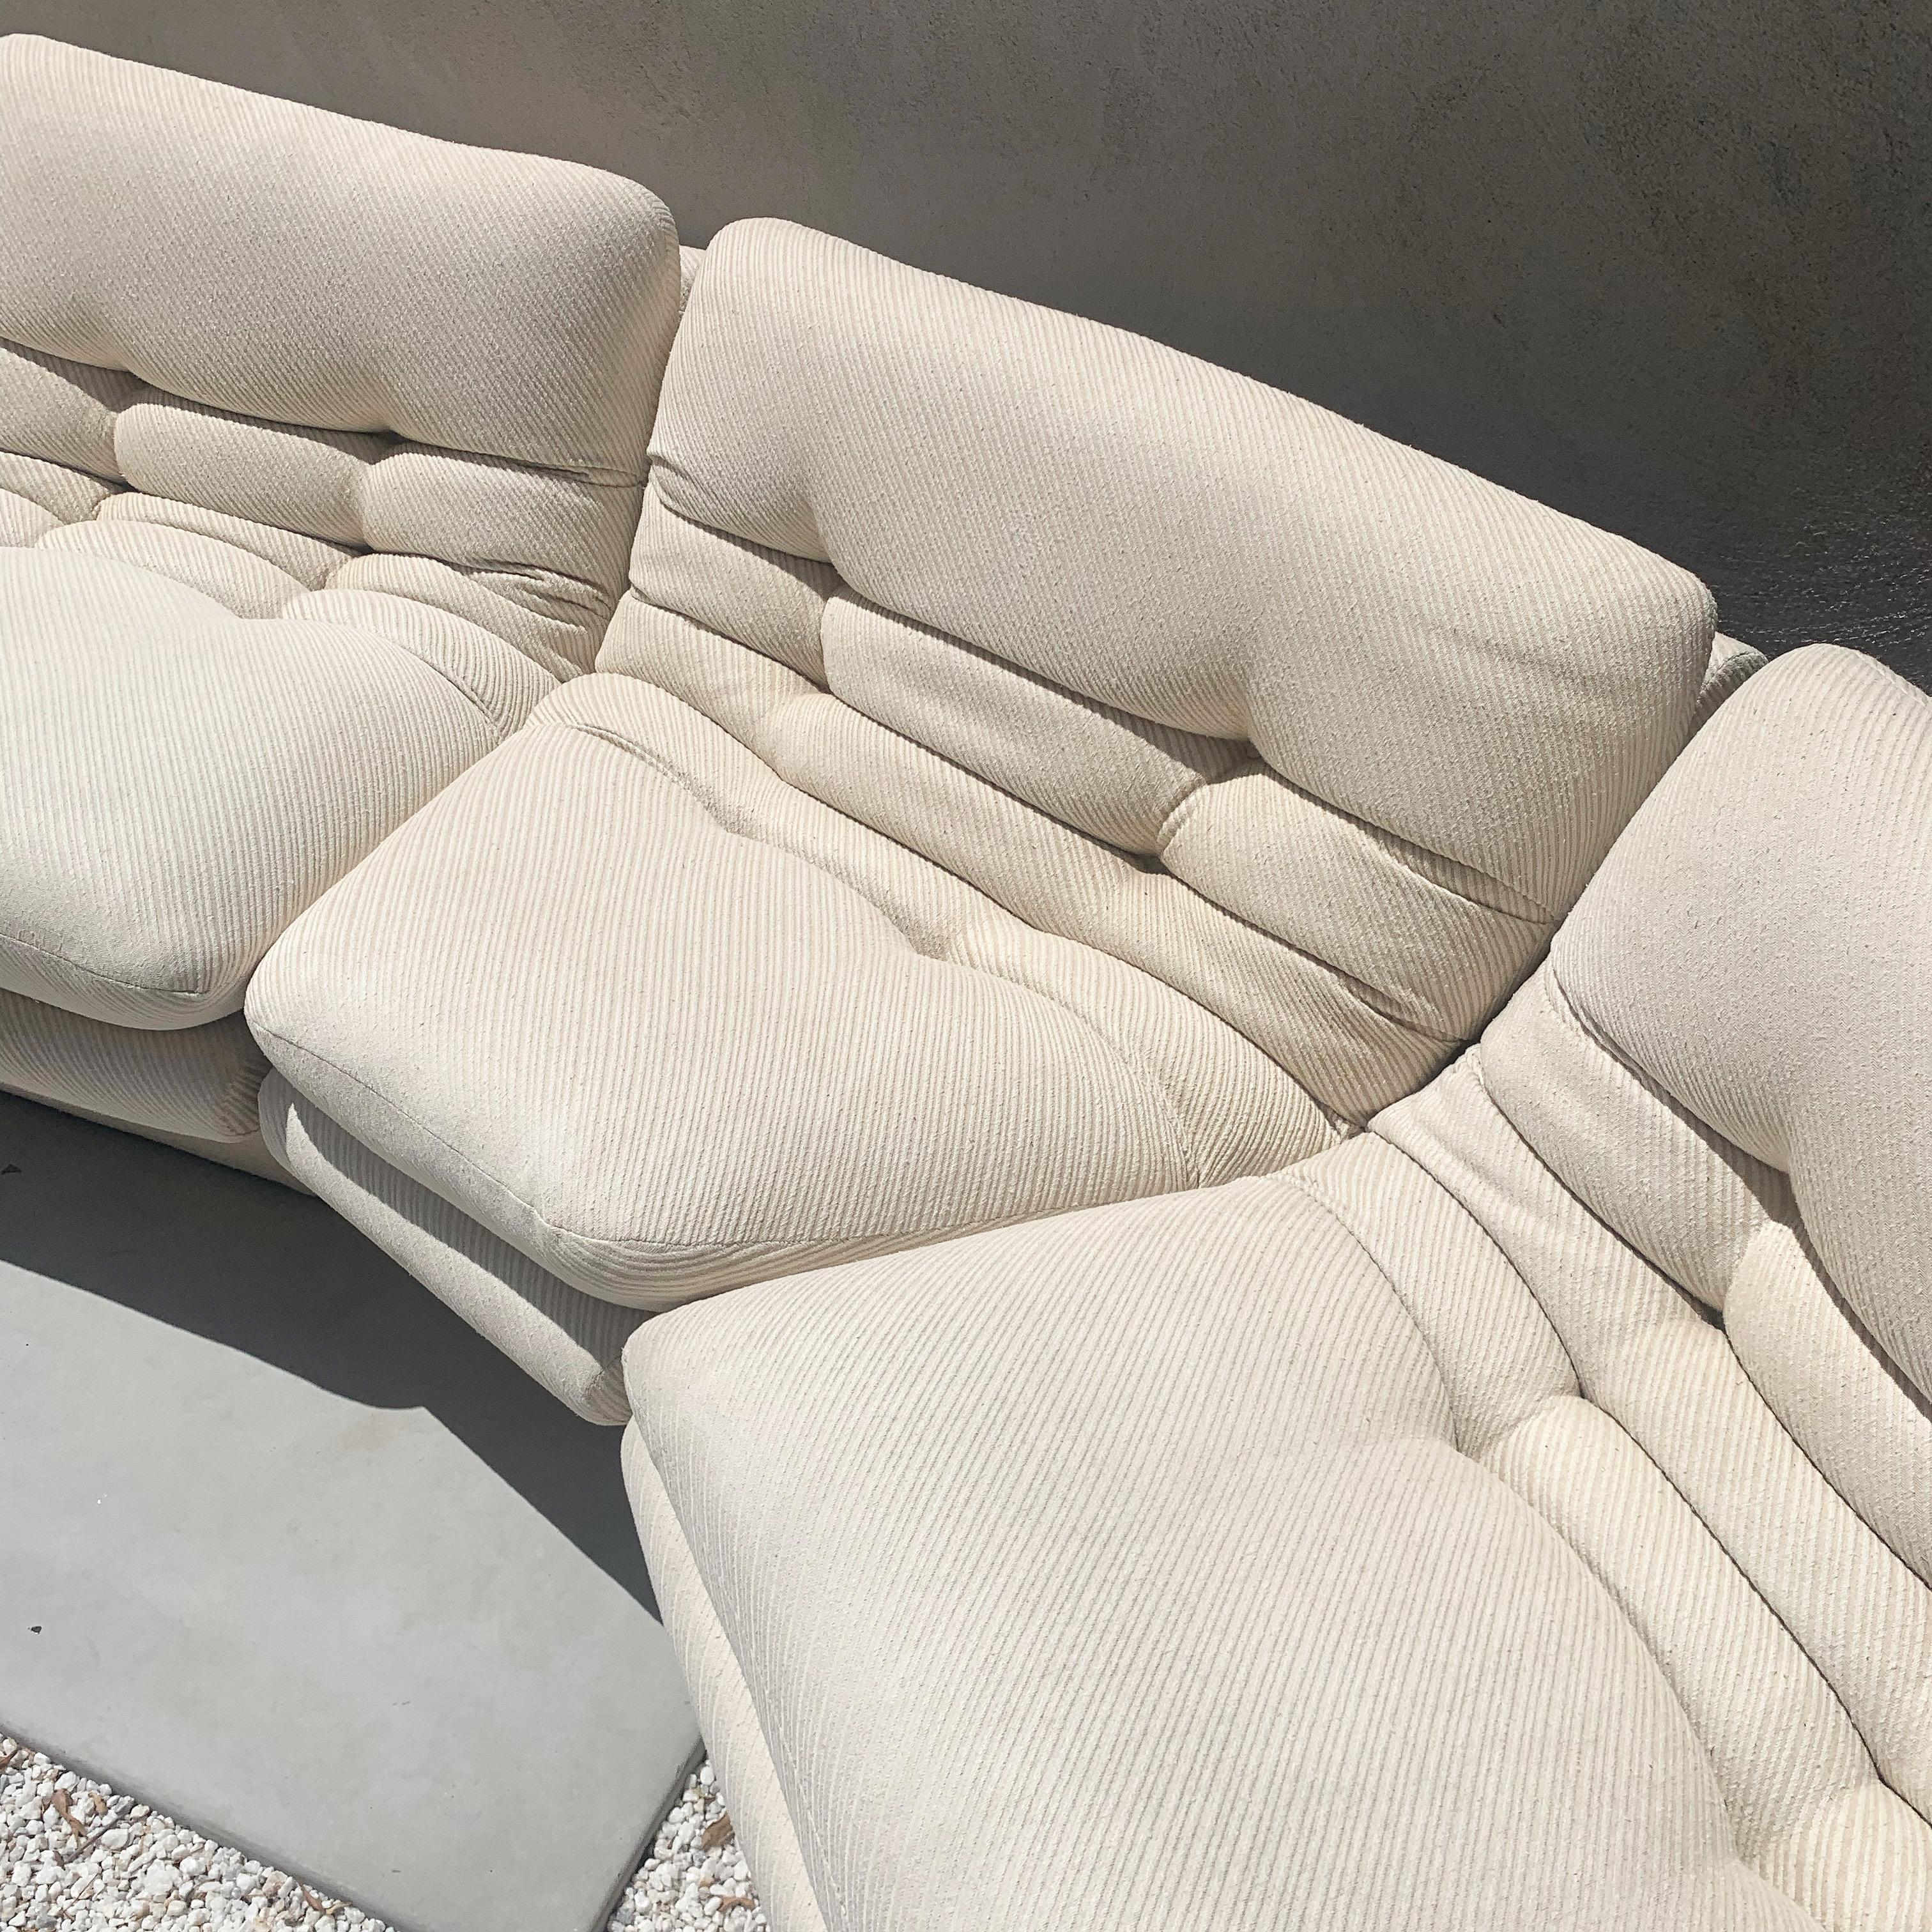 In rare form: mid-century sectional modular sofa by Preview, early 1970s. Six sections are comprised of four square pieces and two triangular. Original fabric - an ivory linen/bouclé blend with an ever so subtle pinstripe in soft taupe. Cushions are